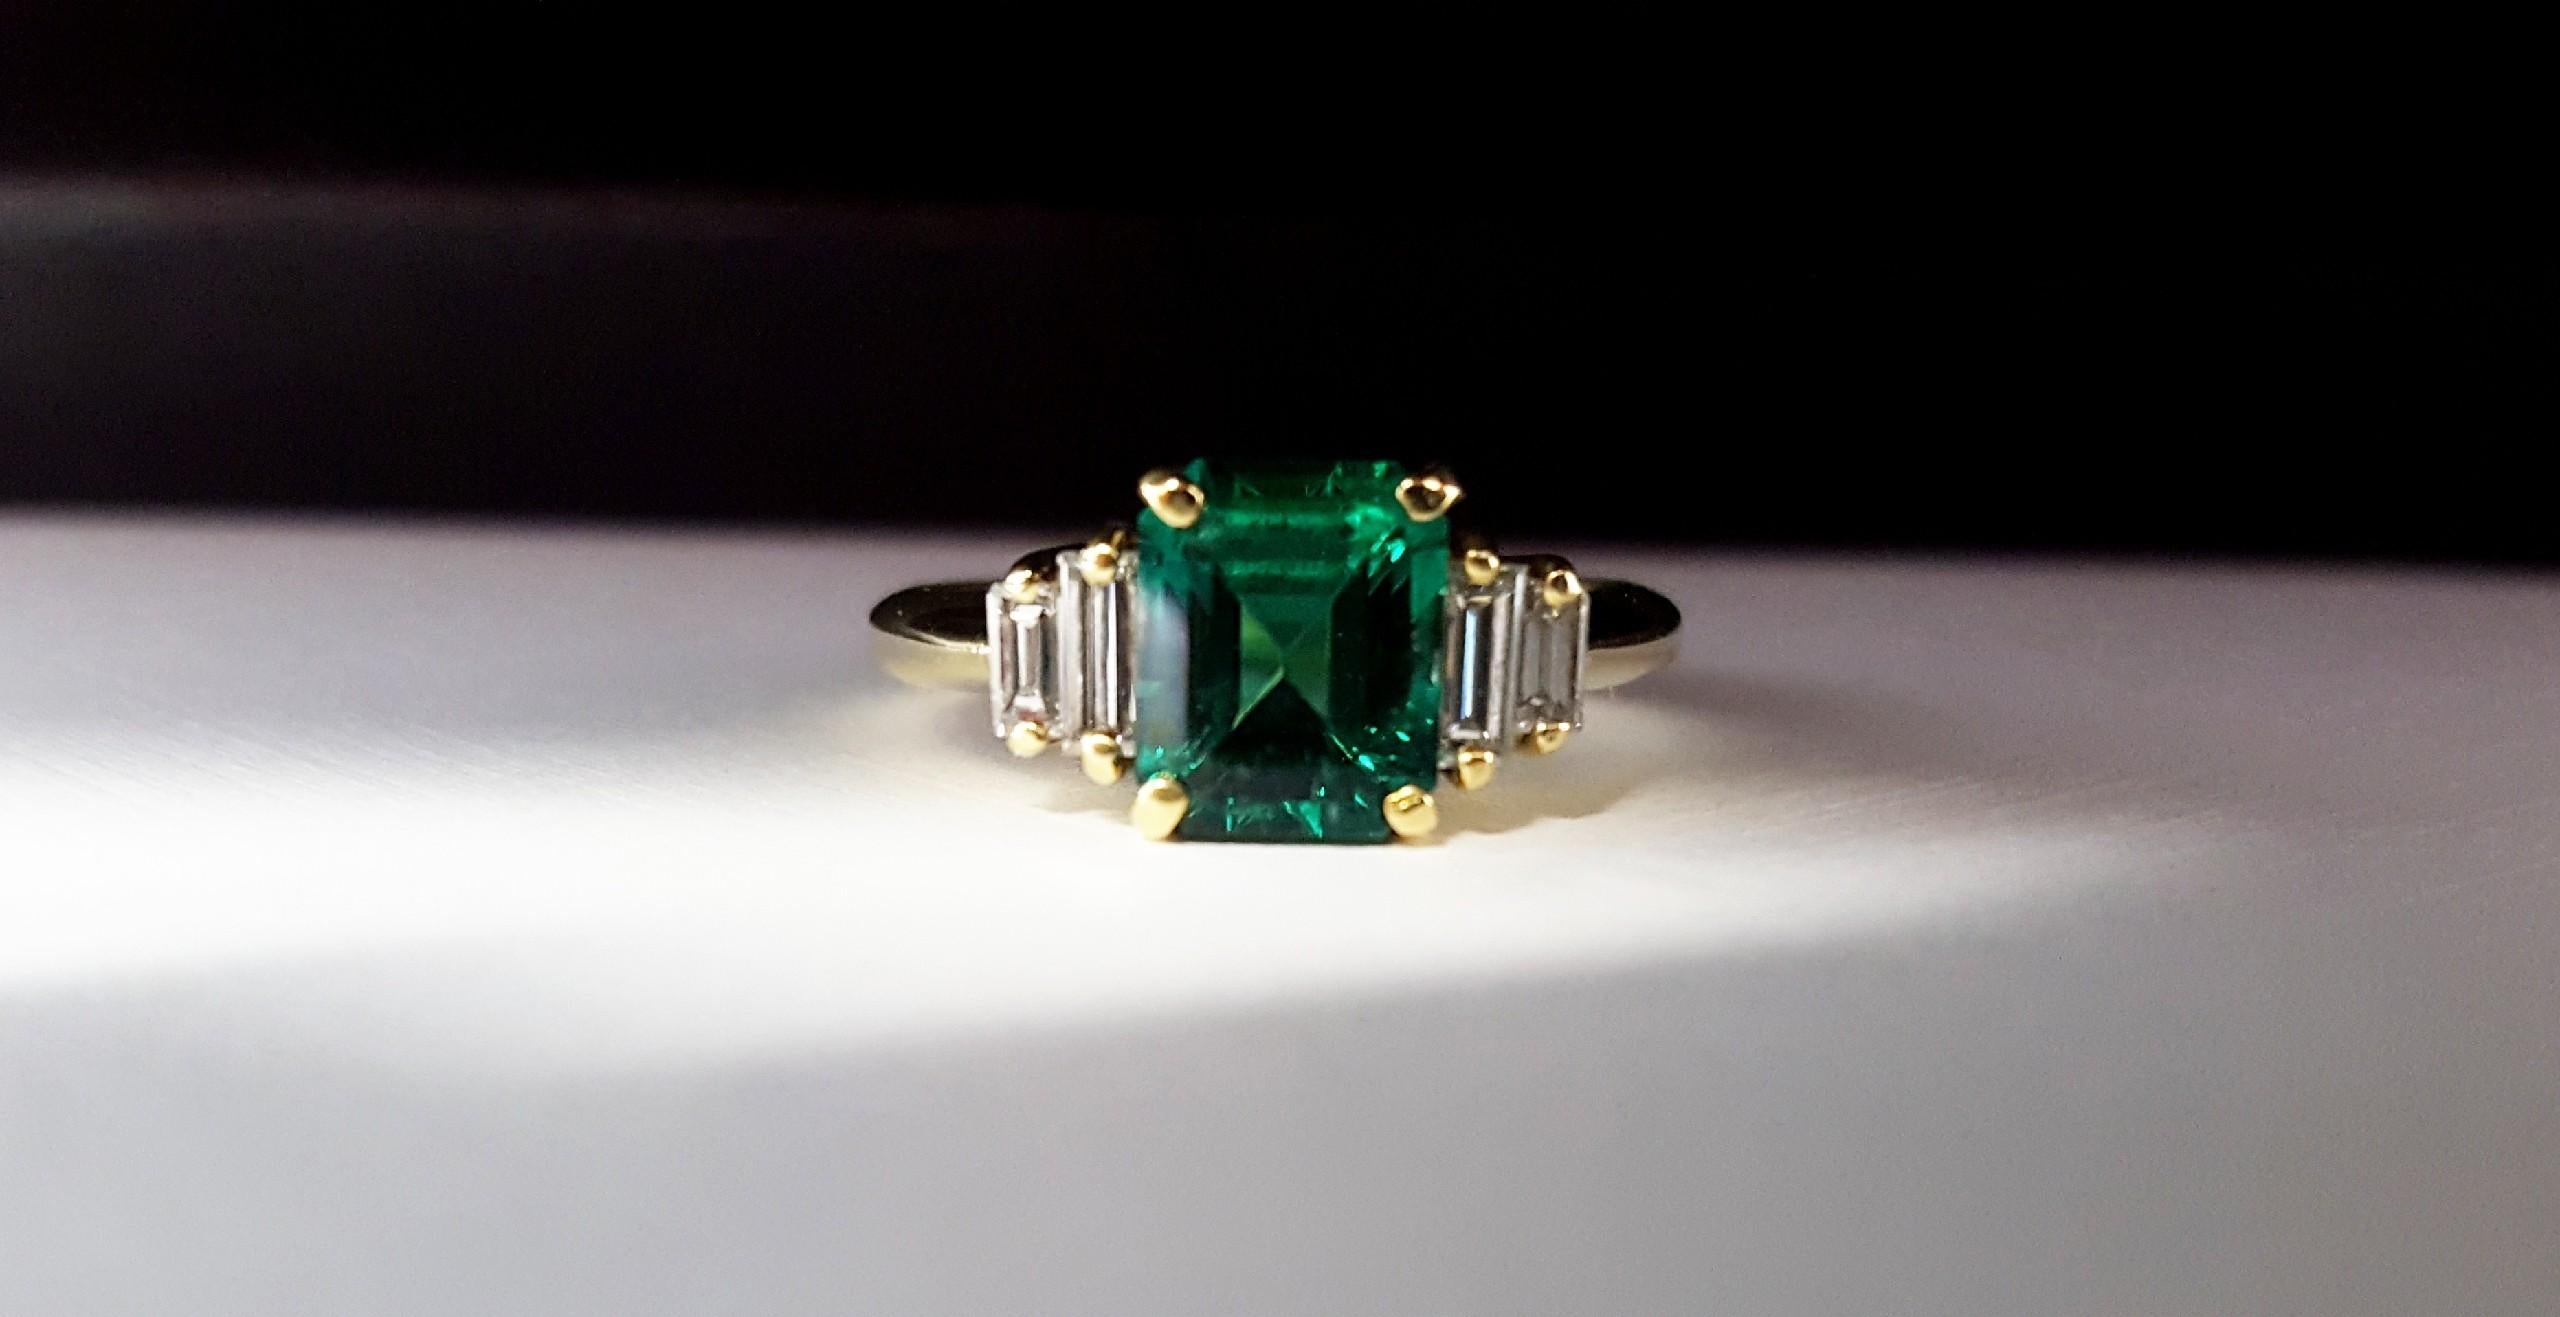 An 18 karat yellow gold ring set with 1 Emerald Cut Emerald and 4 Baguette Cut Diamonds. The Emerald measures 7.73 x 6.05 x 4.48mm and has an estimated weight of 1.60ct. The color is a fine medium green and the diamonds are H color VS2 clarity. All